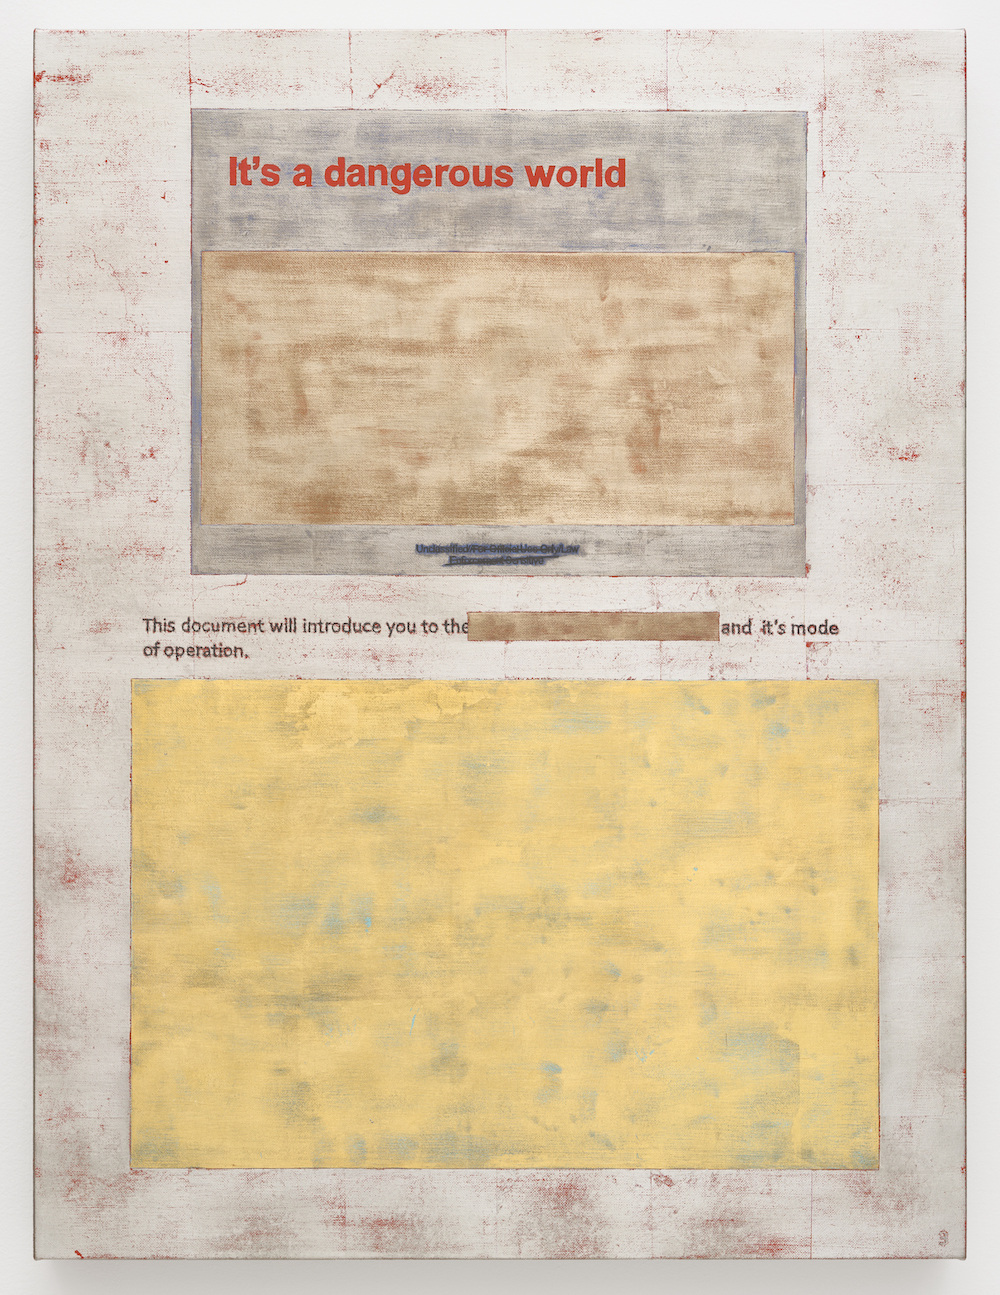 A dangerous world, Jenny Holzer, 2022, 24k gold, Caplaingold, moon gold and platinum leaf and oil on linen 61 x 46 2 x 3.8cm / 24 x 18 1/ 4x1 1/2 in. Image coutesy the artist and Hauser & Wirth. Photography by Filip Wolak.